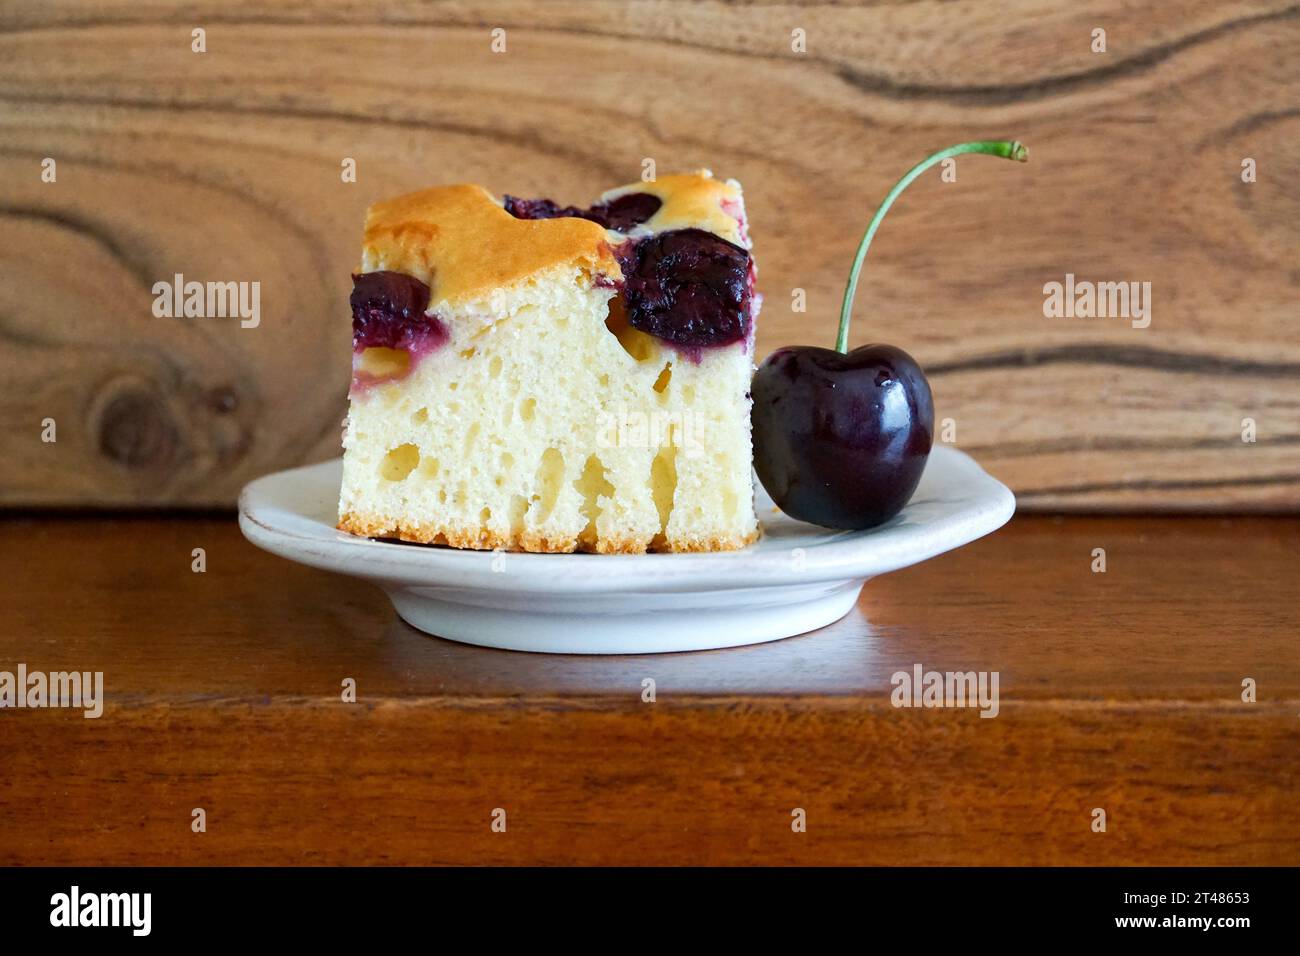 Cherry cake on white plate and wooden background. Selective focus. Stock Photo